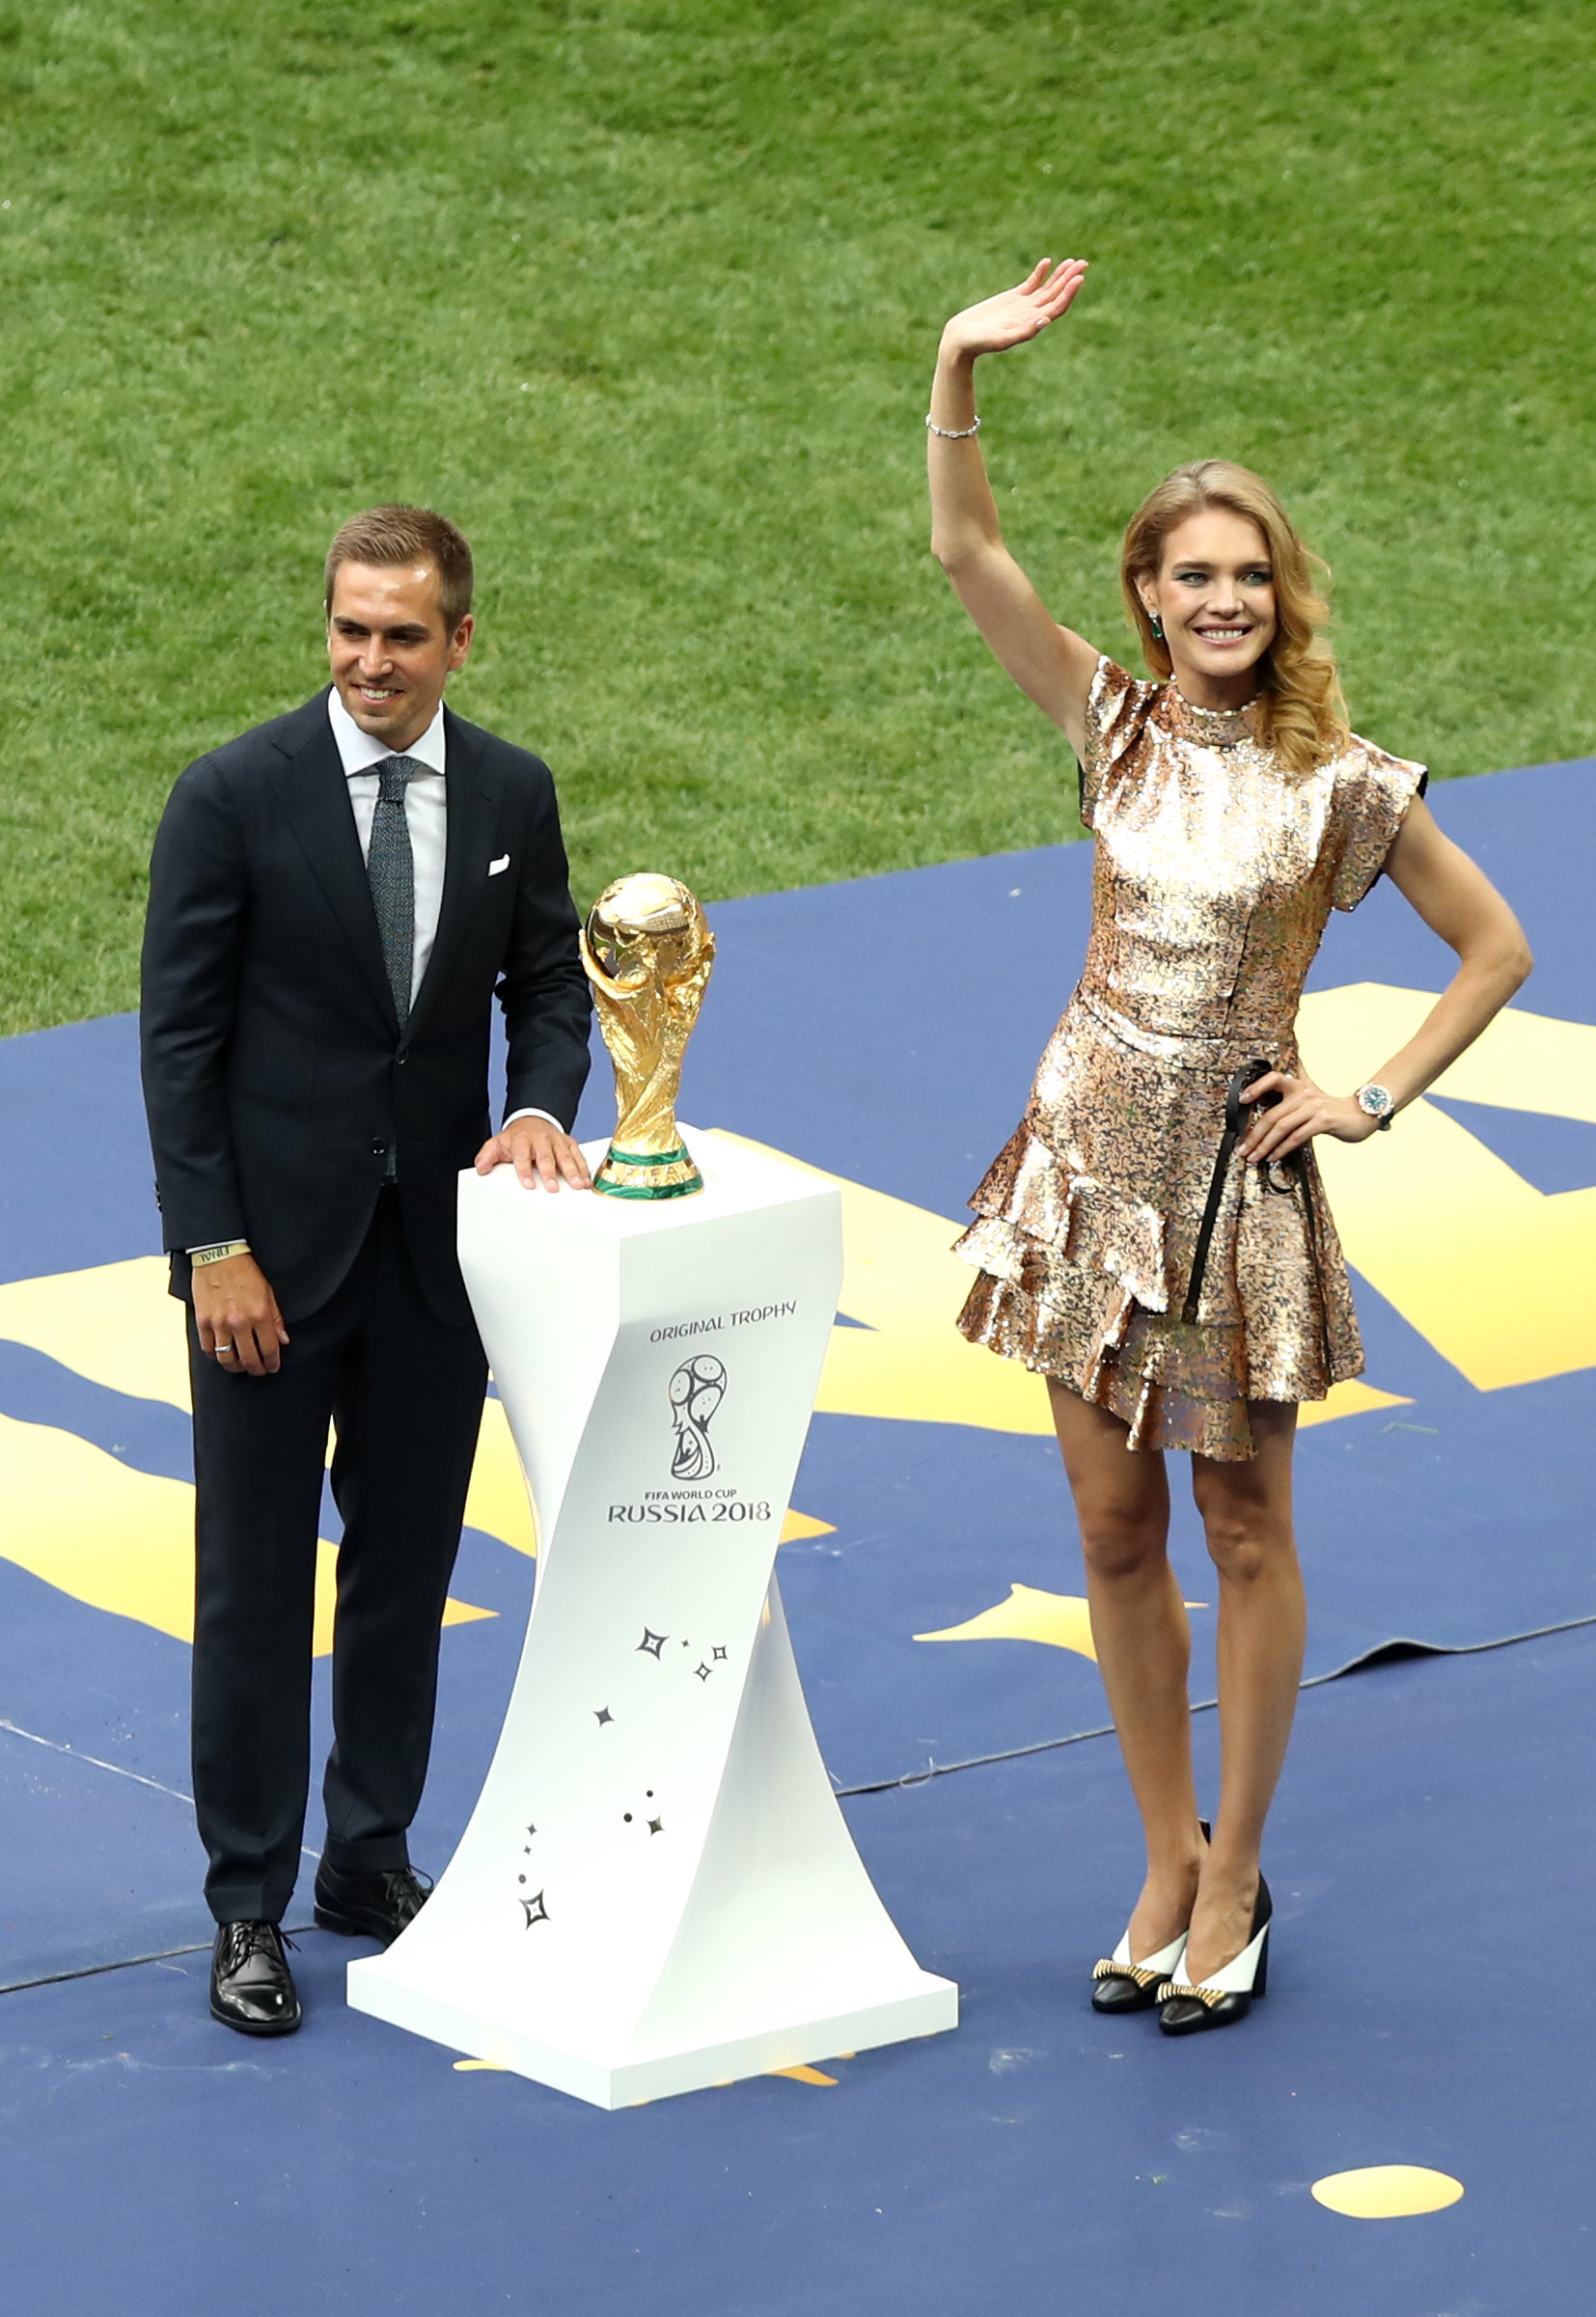 FIFA World Cup Russia 2018: Natalia Vodianova, the model guardian of the World  Cup trophy - Foto 11 de 14